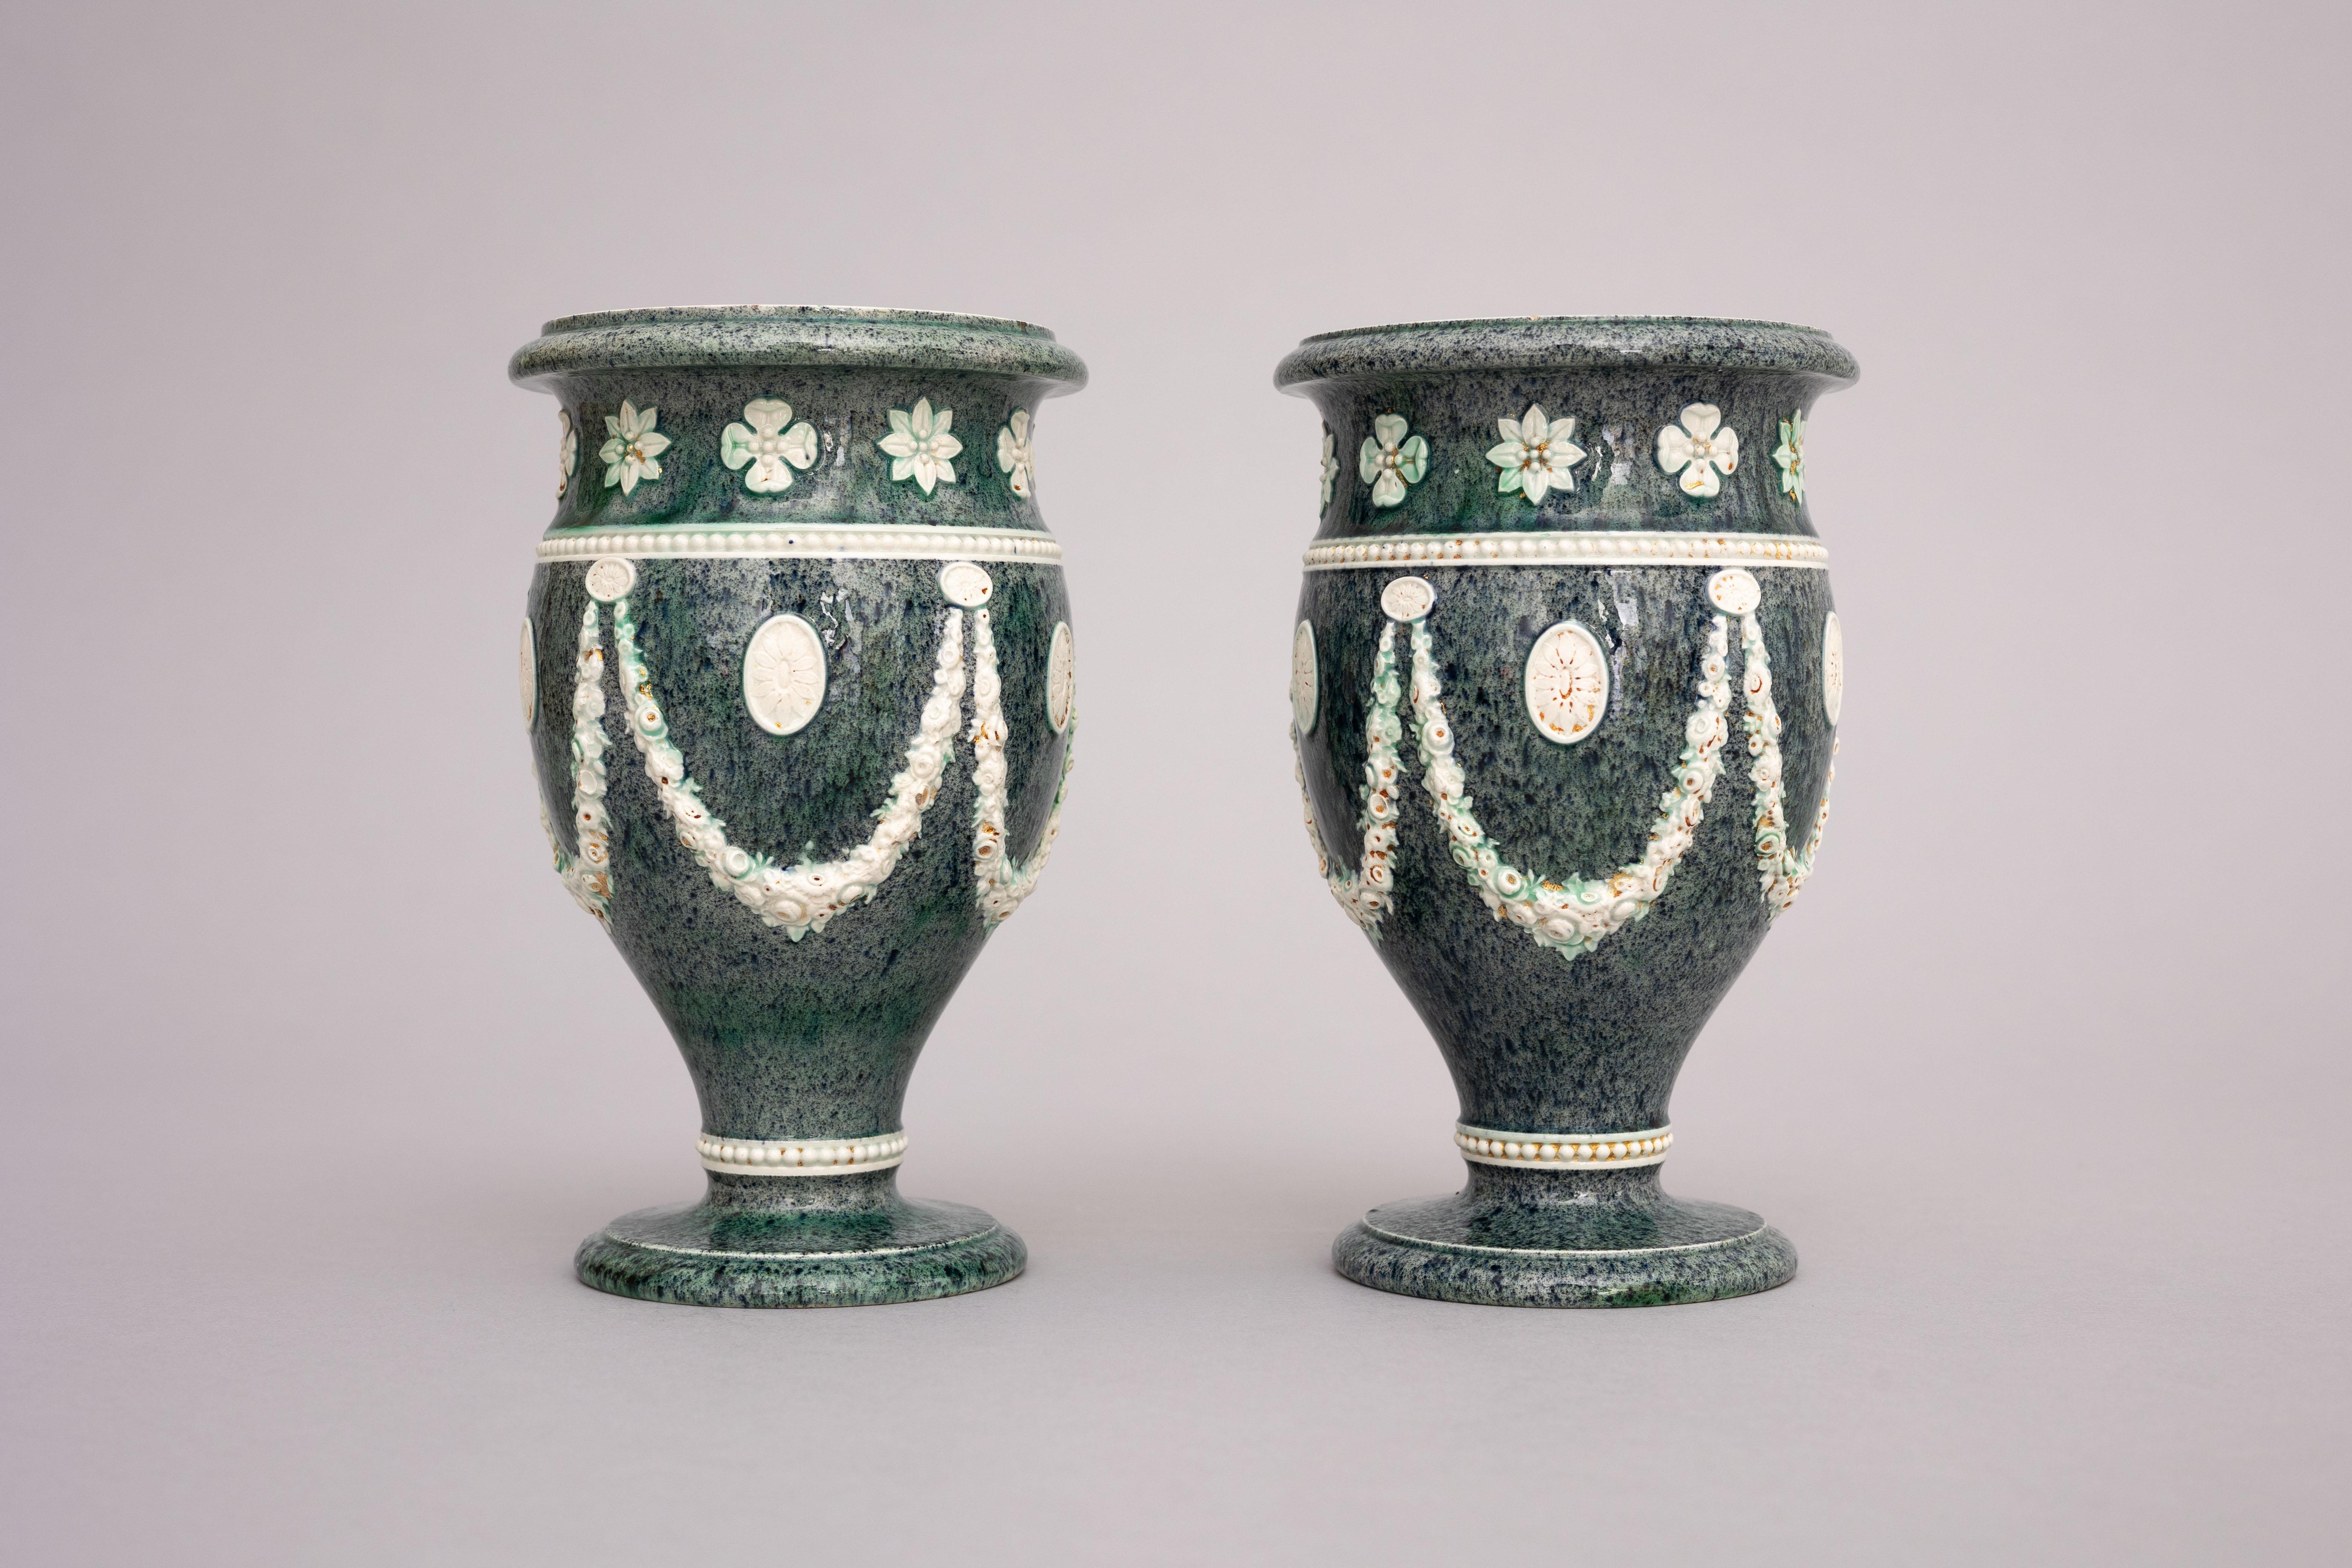 Neoclassical Pair of Early Wedgwood Pearlware Porphyry Urns